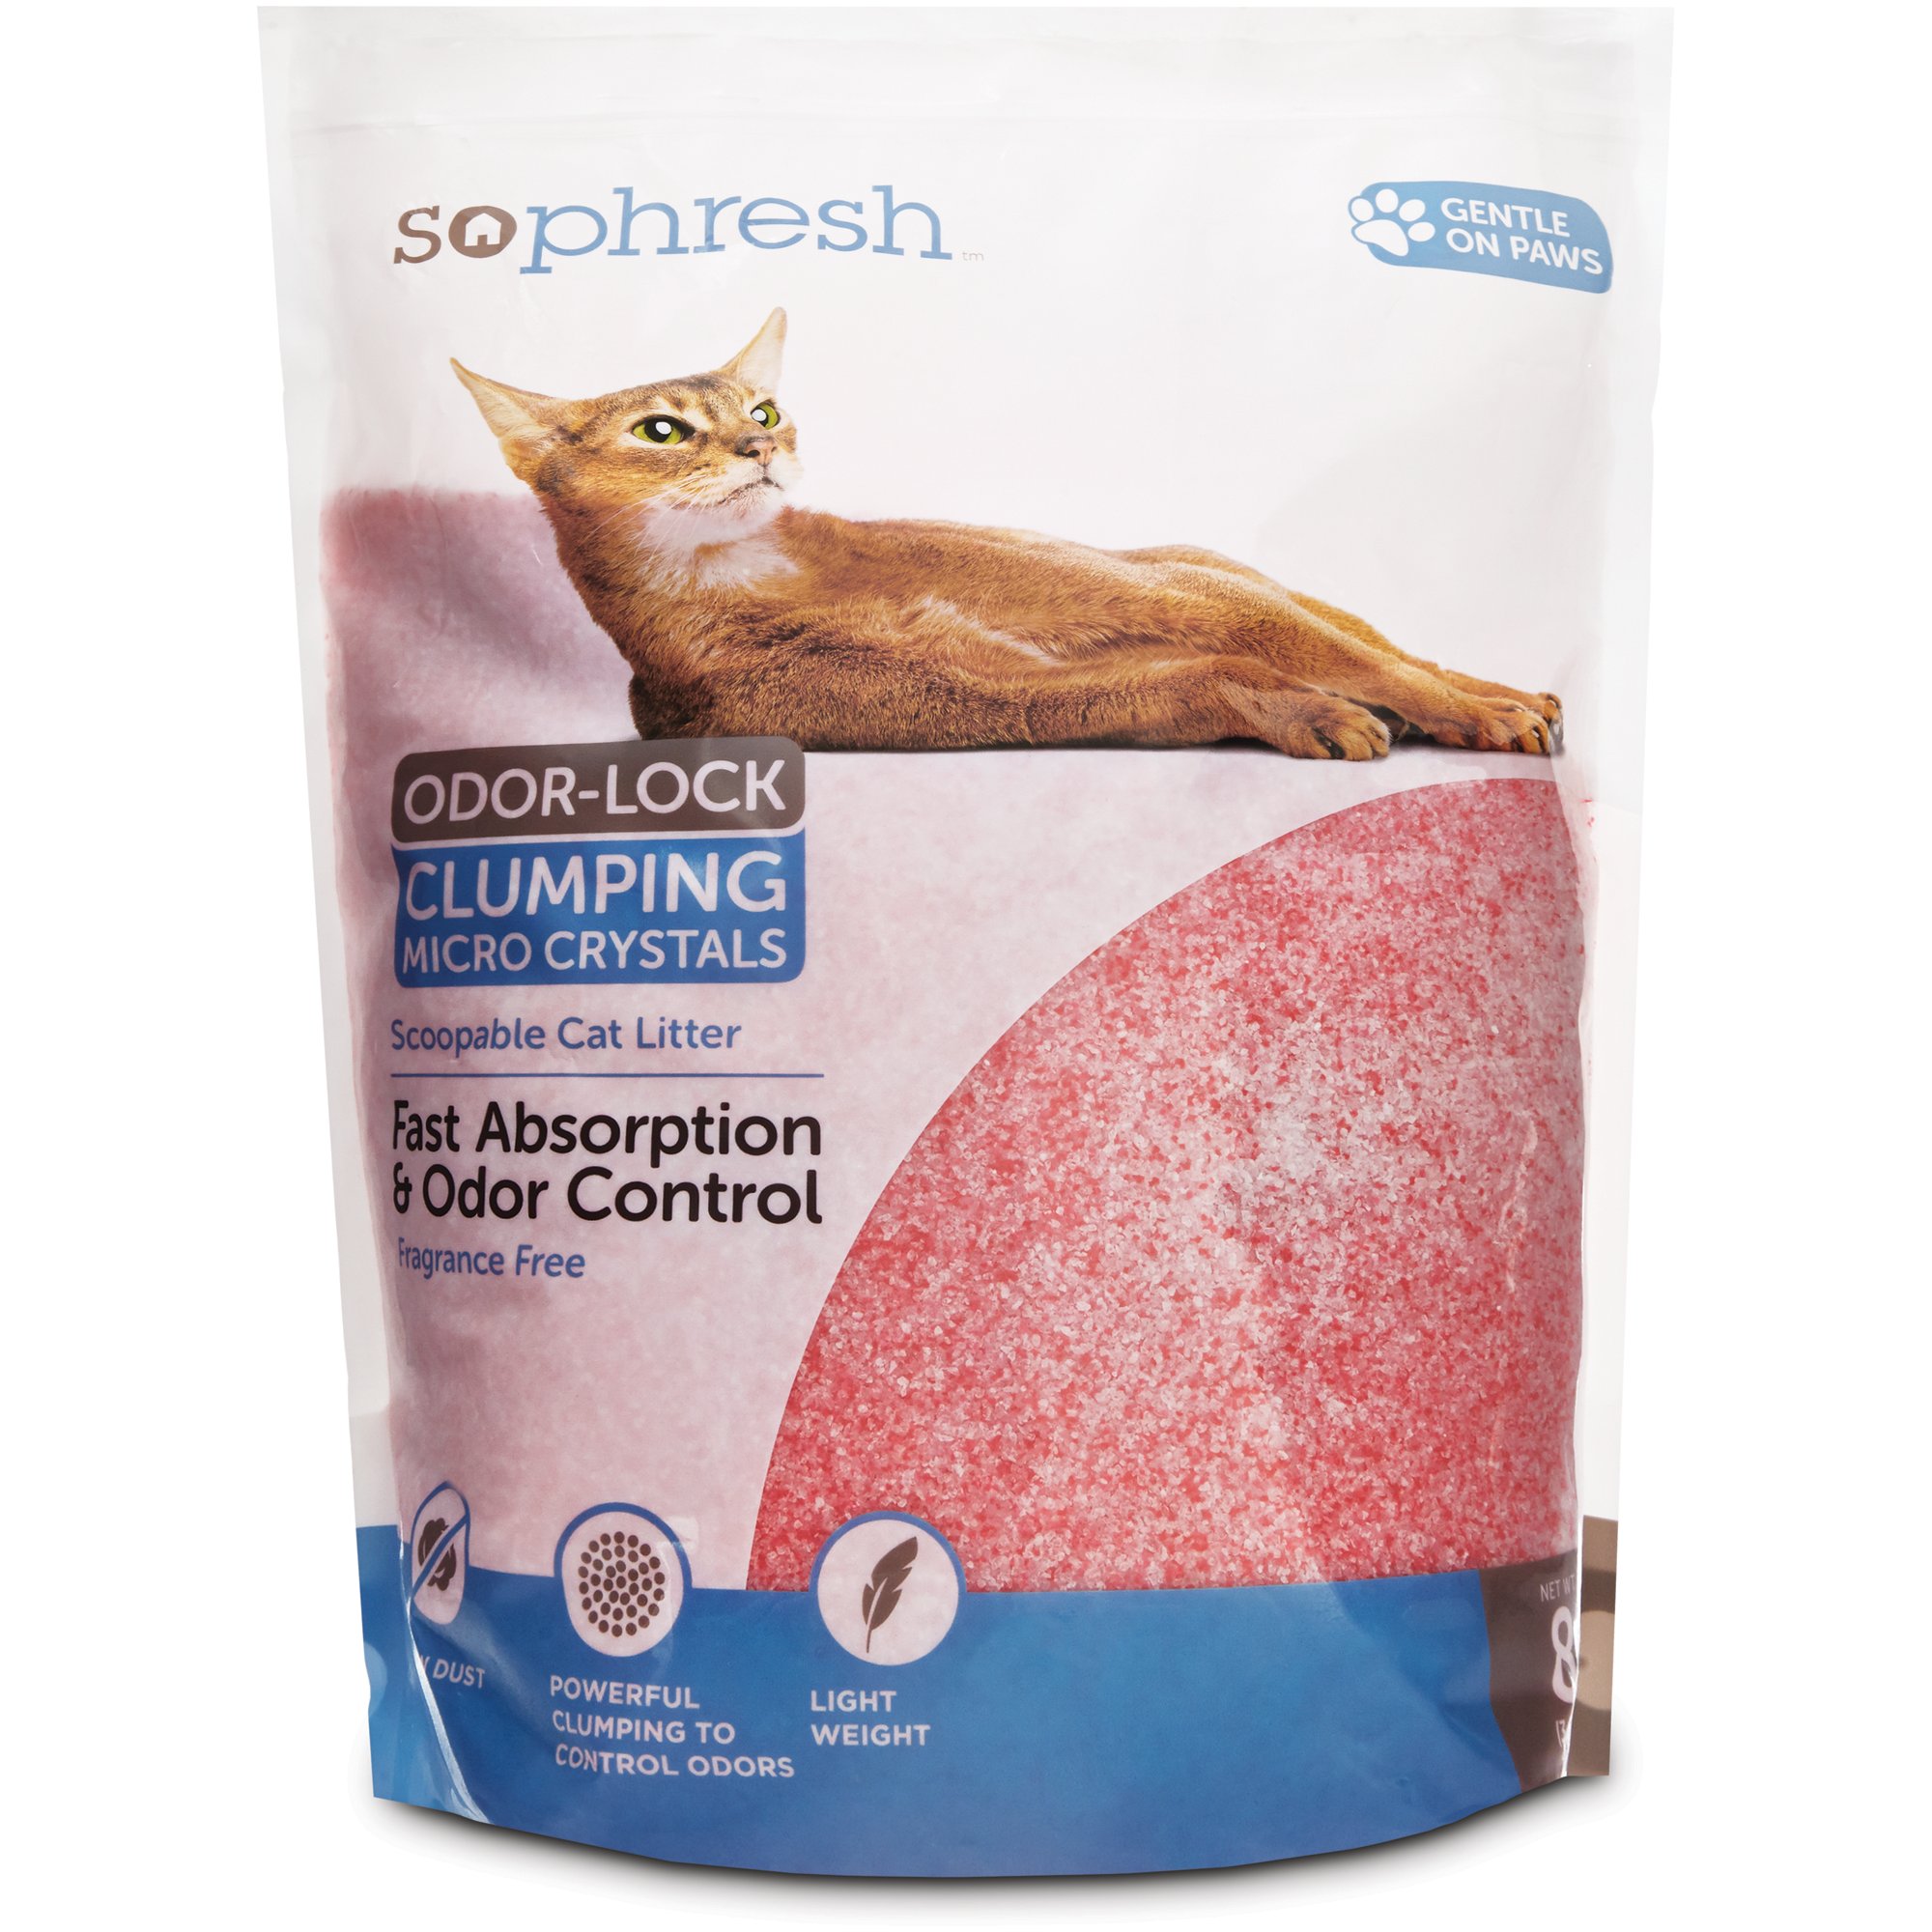 So Phresh Scoopable OdorLock Clumping Micro Crystal Cat Litter in Pink